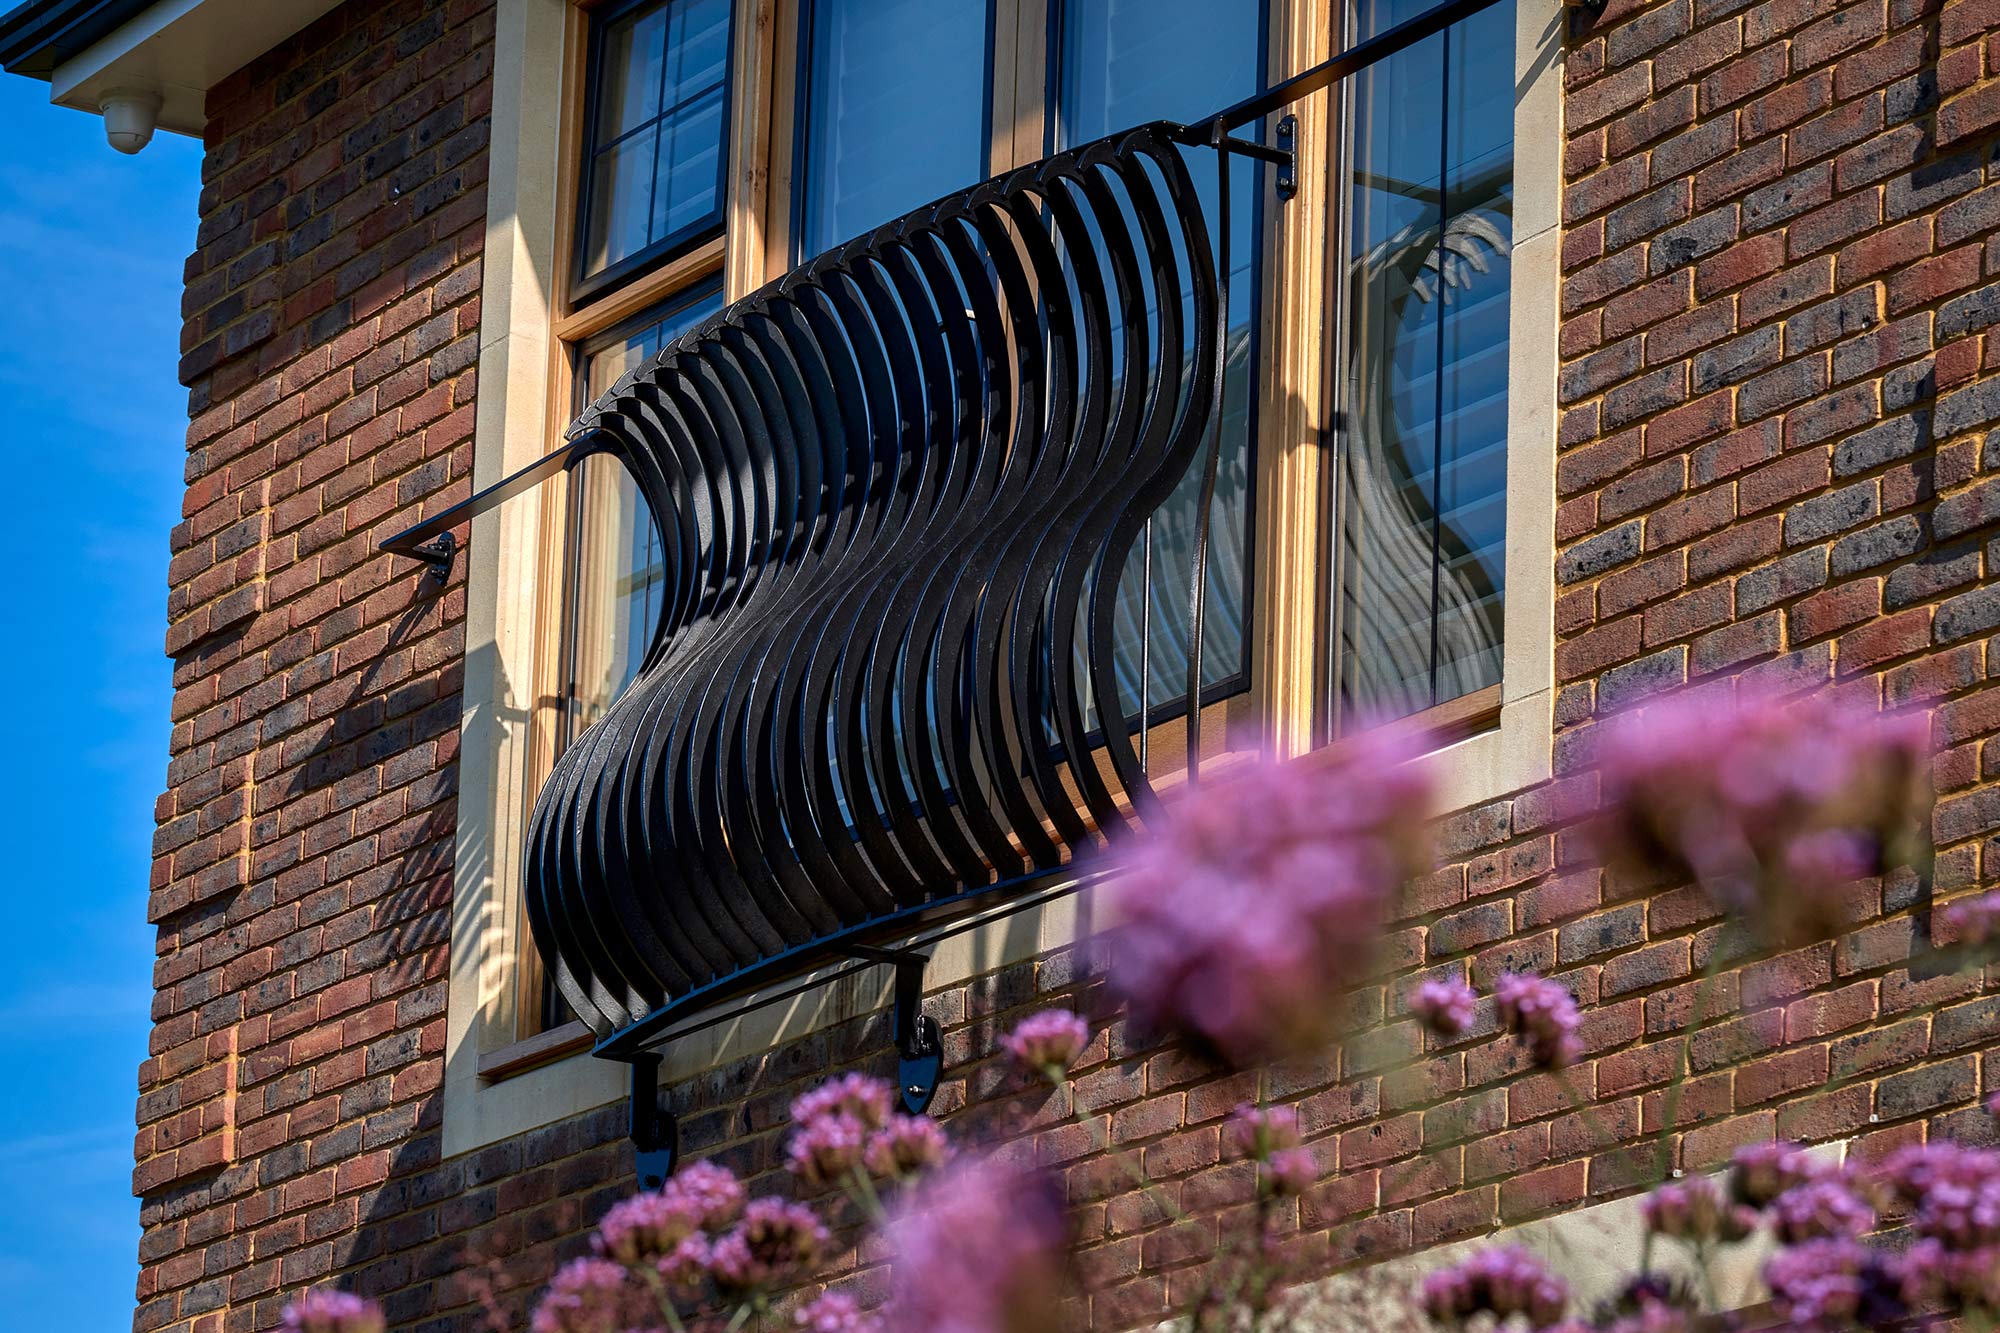 Balcony detail of Arts and Crafts House - built by KM Grant, Guildford, Surrey.